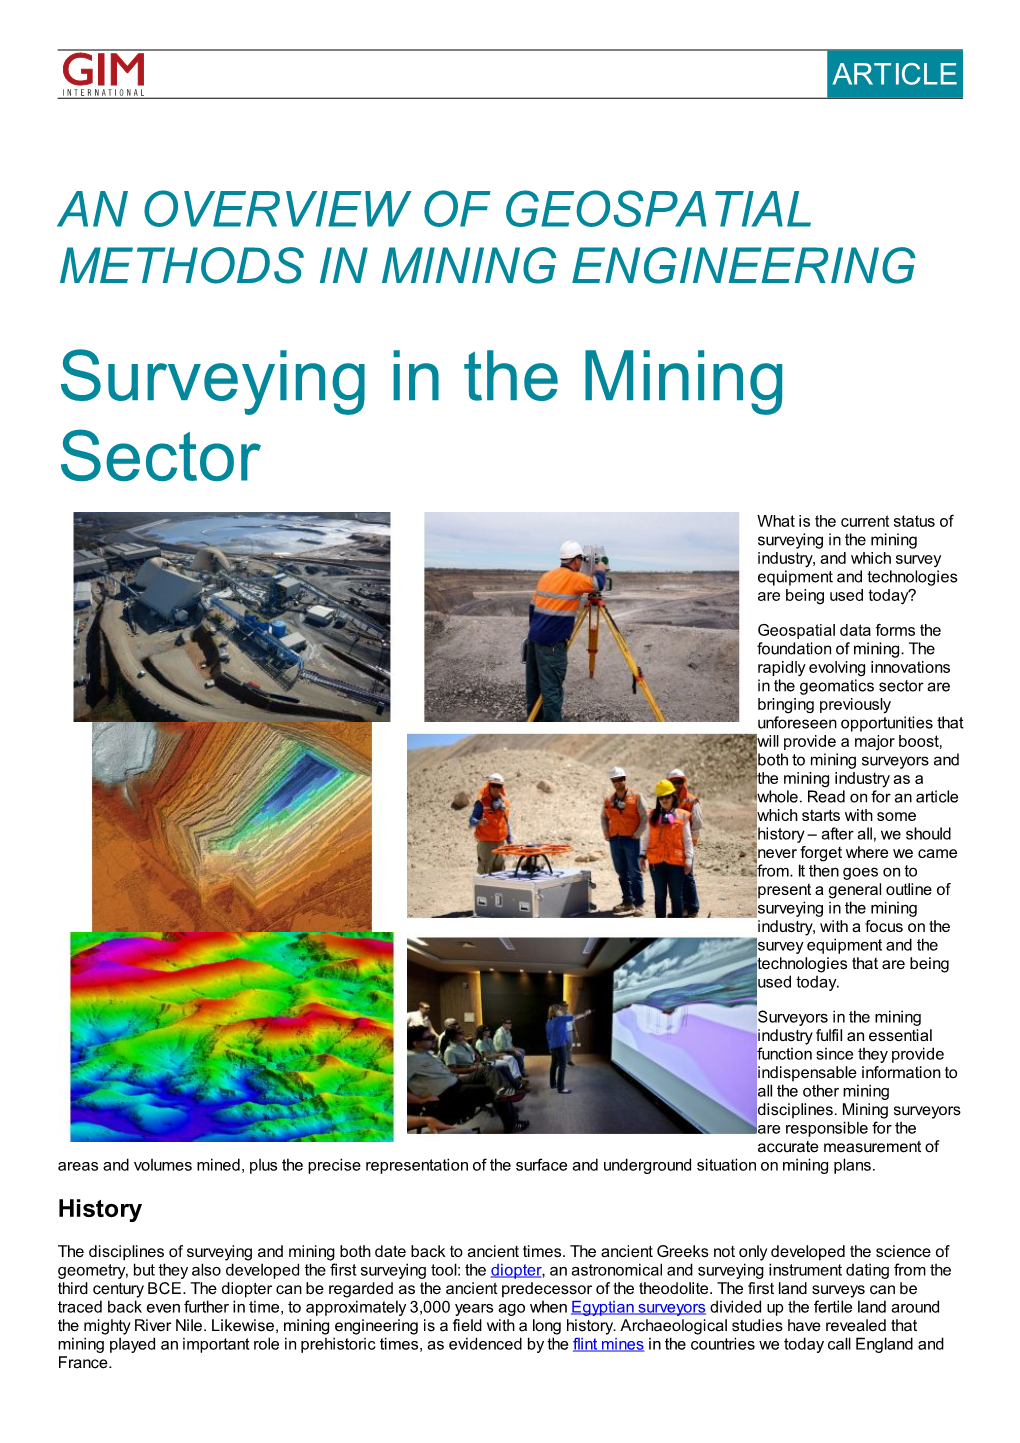 Surveying in the Mining Sector